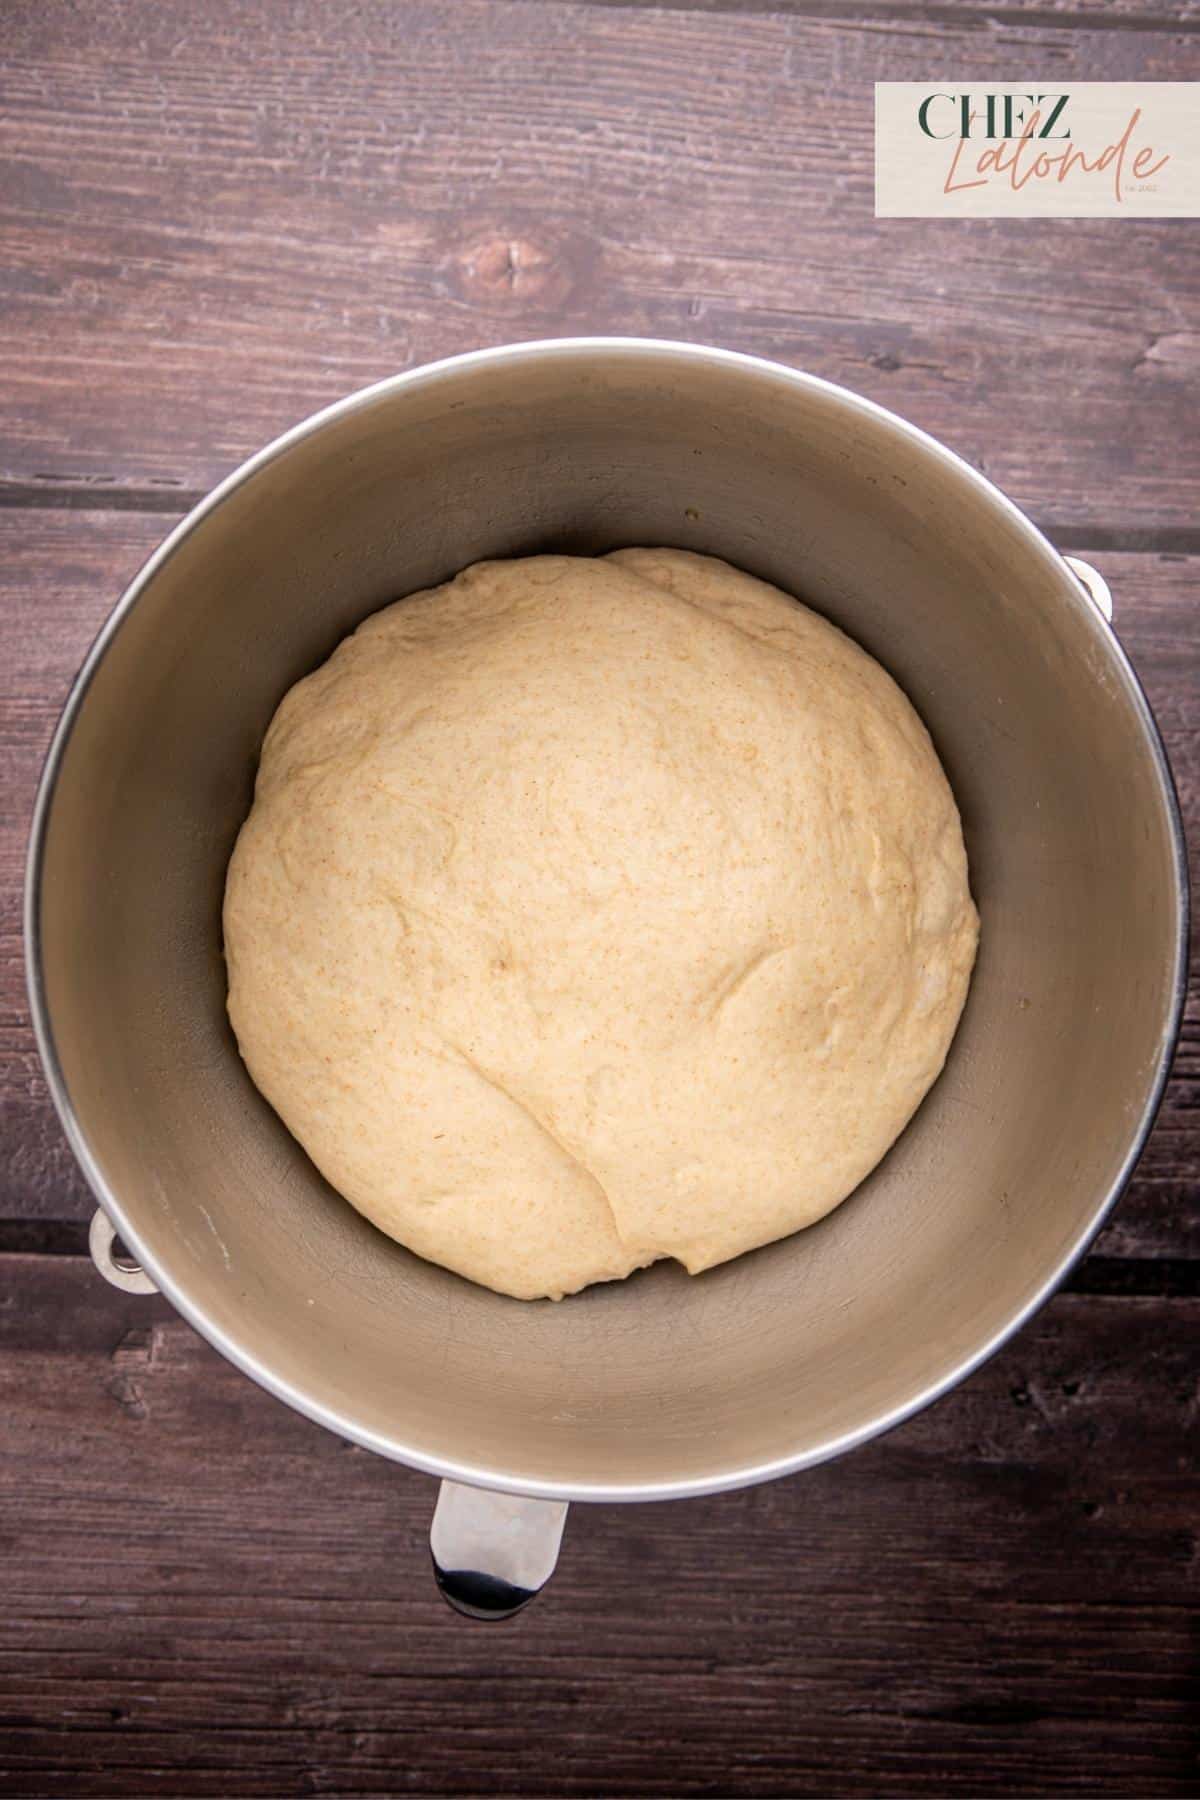 Once the 1st proof is complete, the dough should have doubled. 